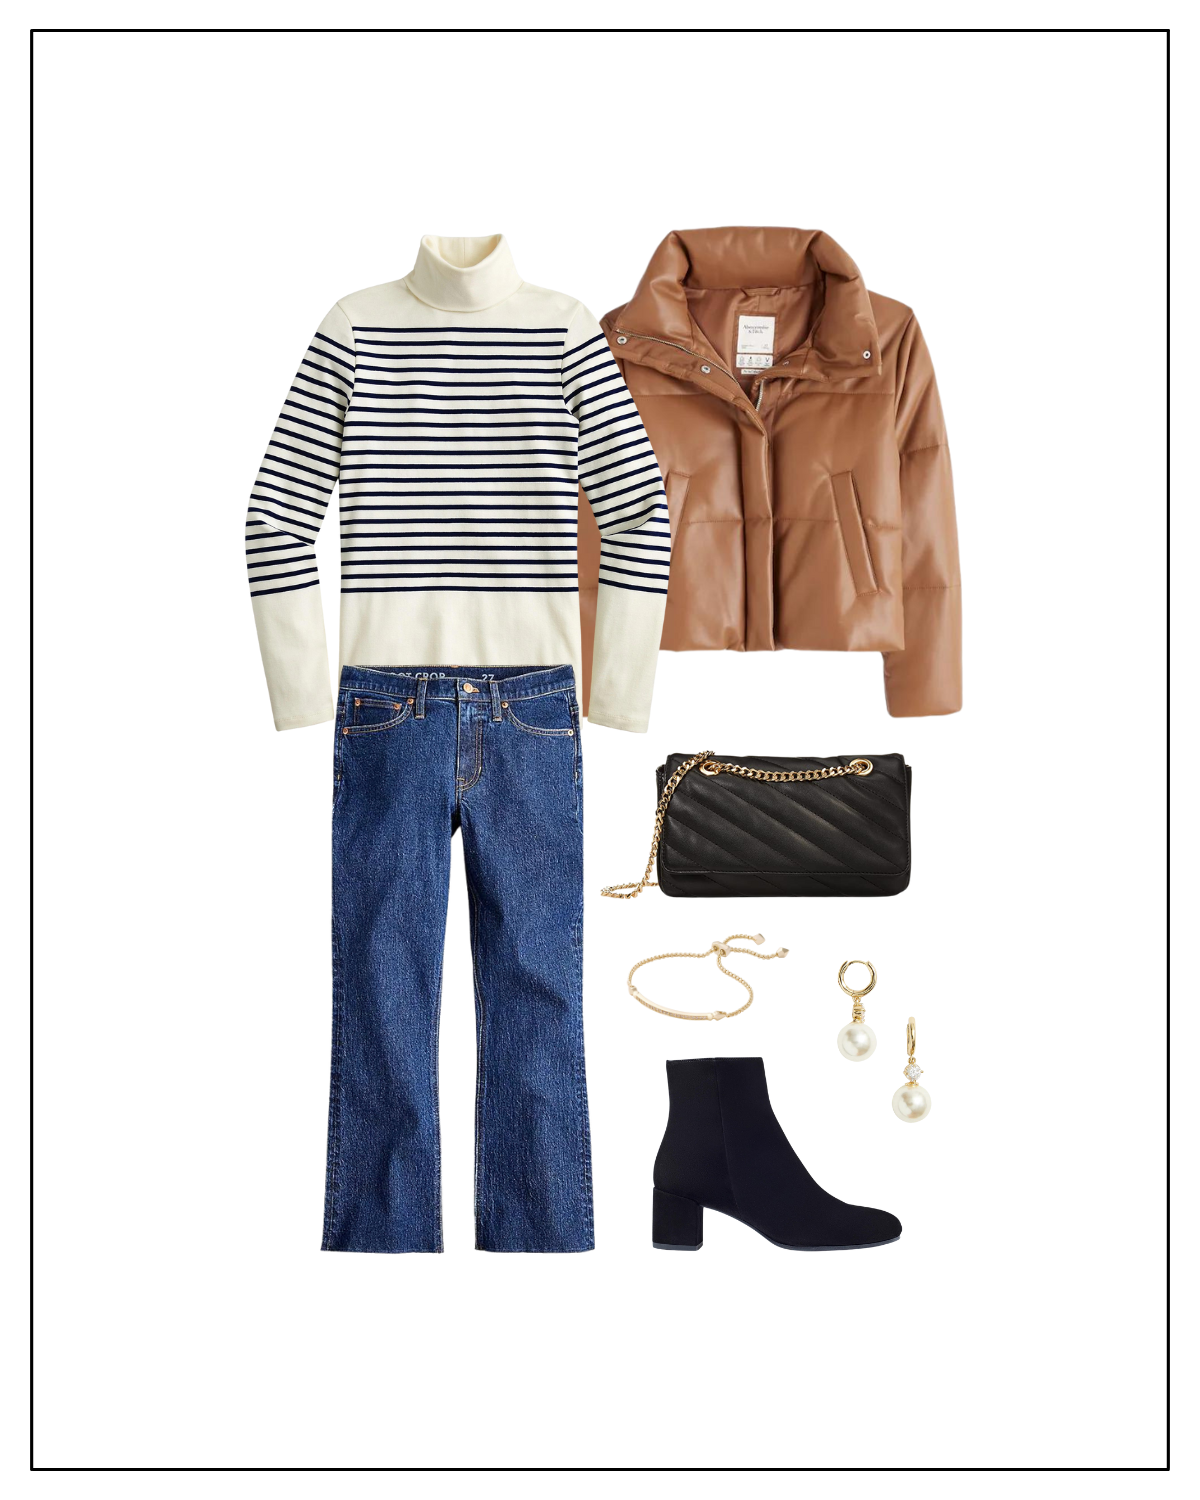 How to Style a Leather Puffer Jacket with a Striped Turtleneck